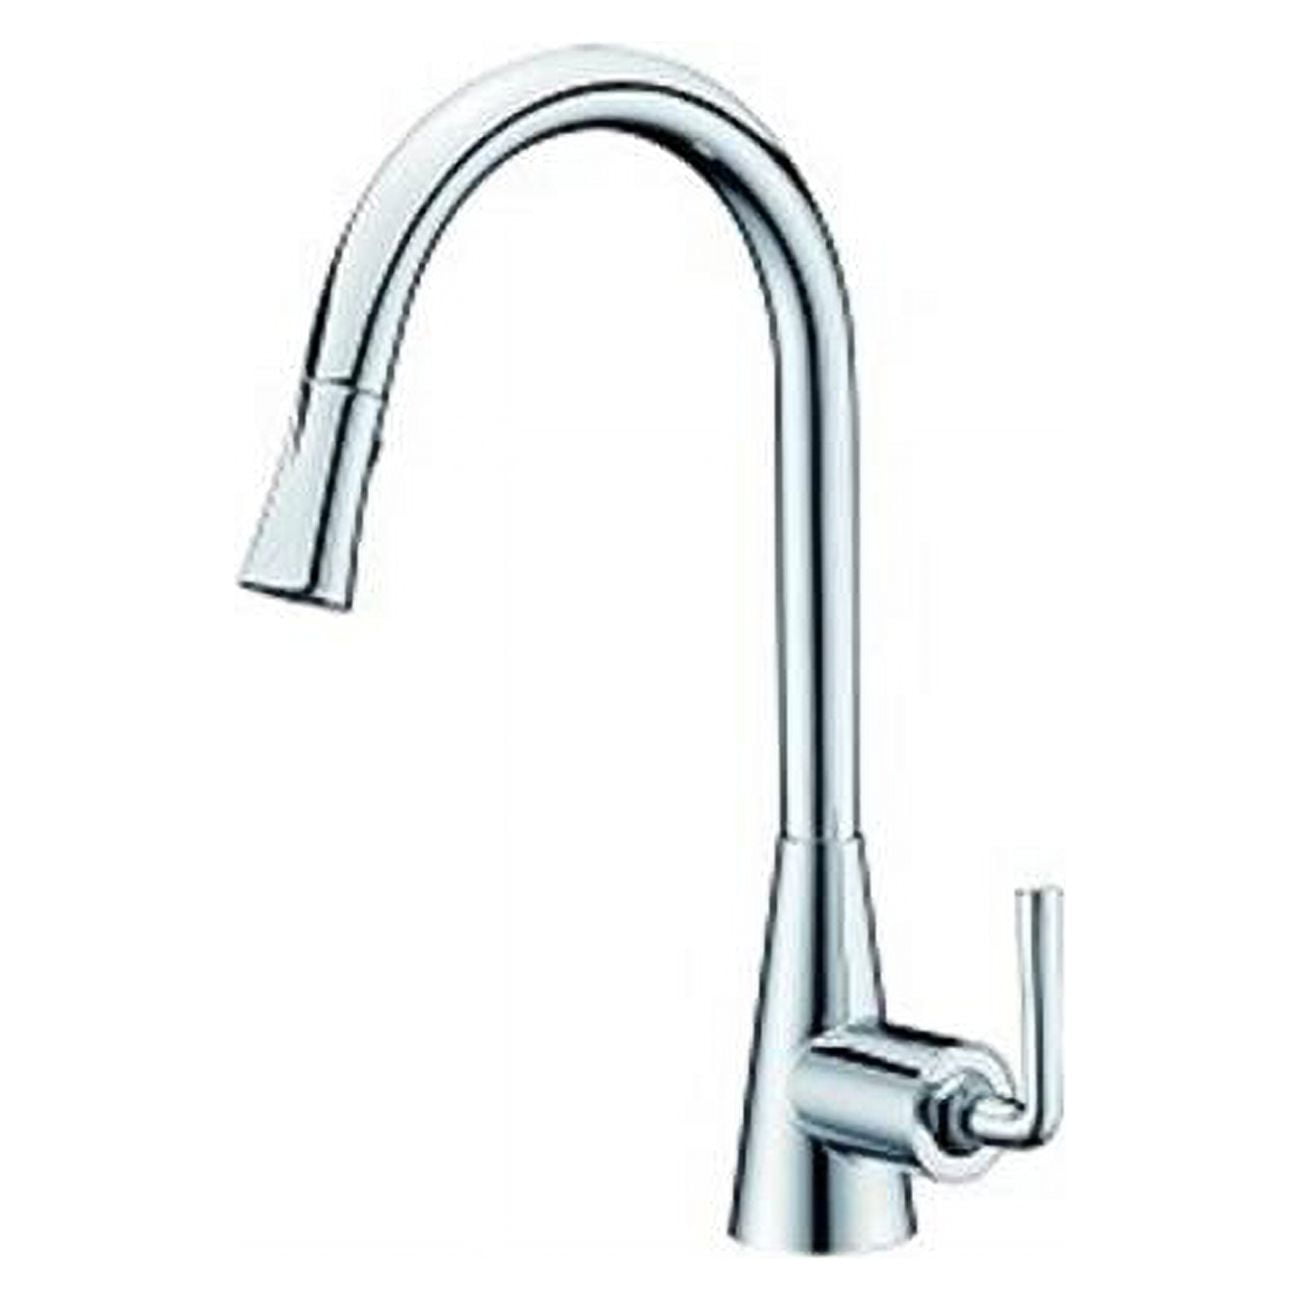 Picture of Dawn AB30 3788C Dawn Single-Lever Pull-Down Spray Sink Mixer, Chrome